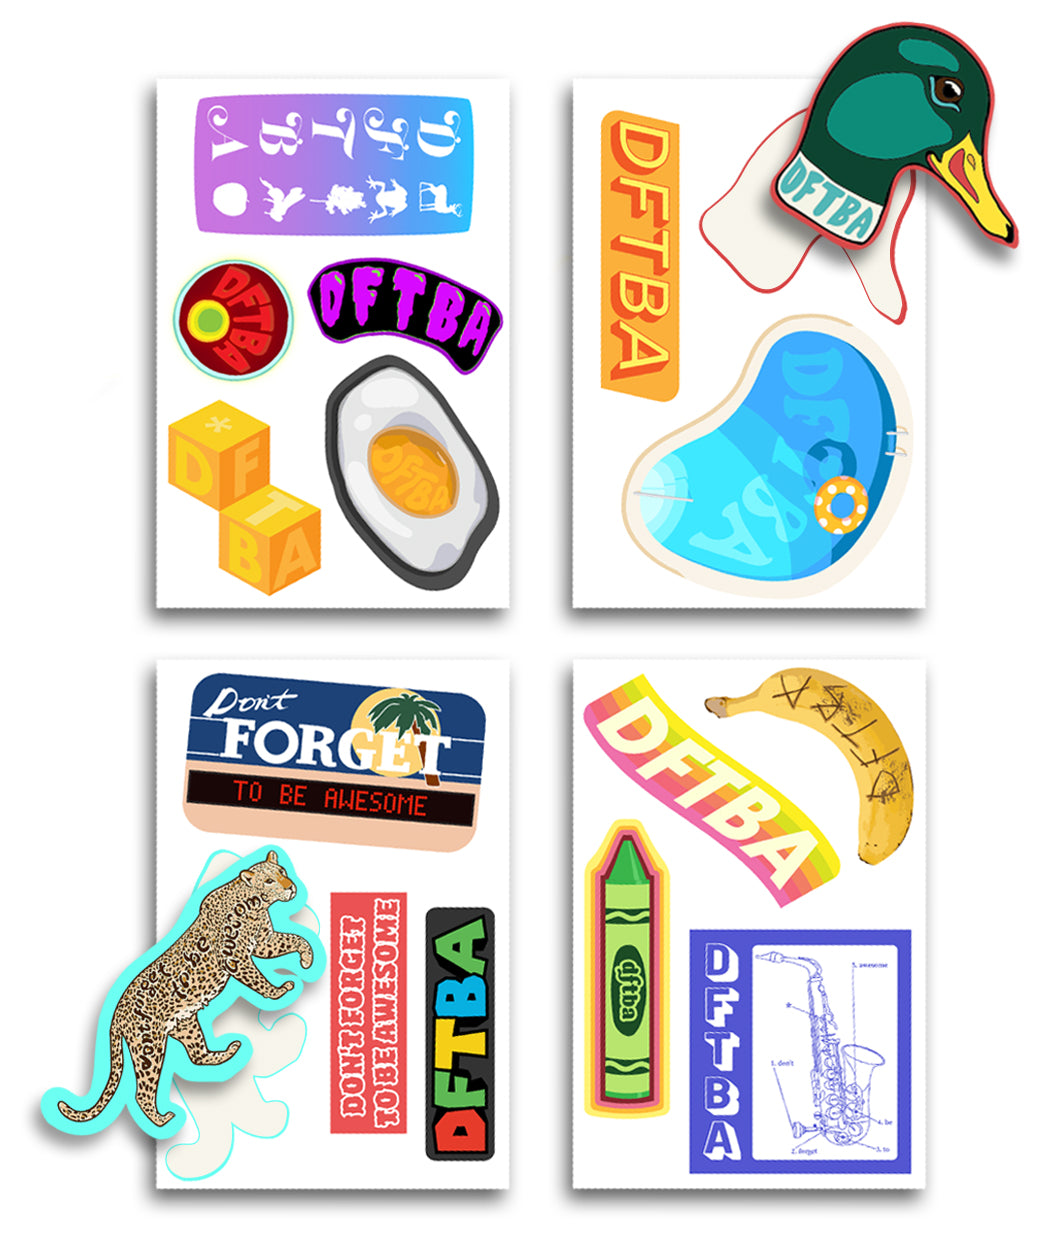 Sixteen different designs of “ DFTBA" stickers across four sticker sheets - from DFTBA Records